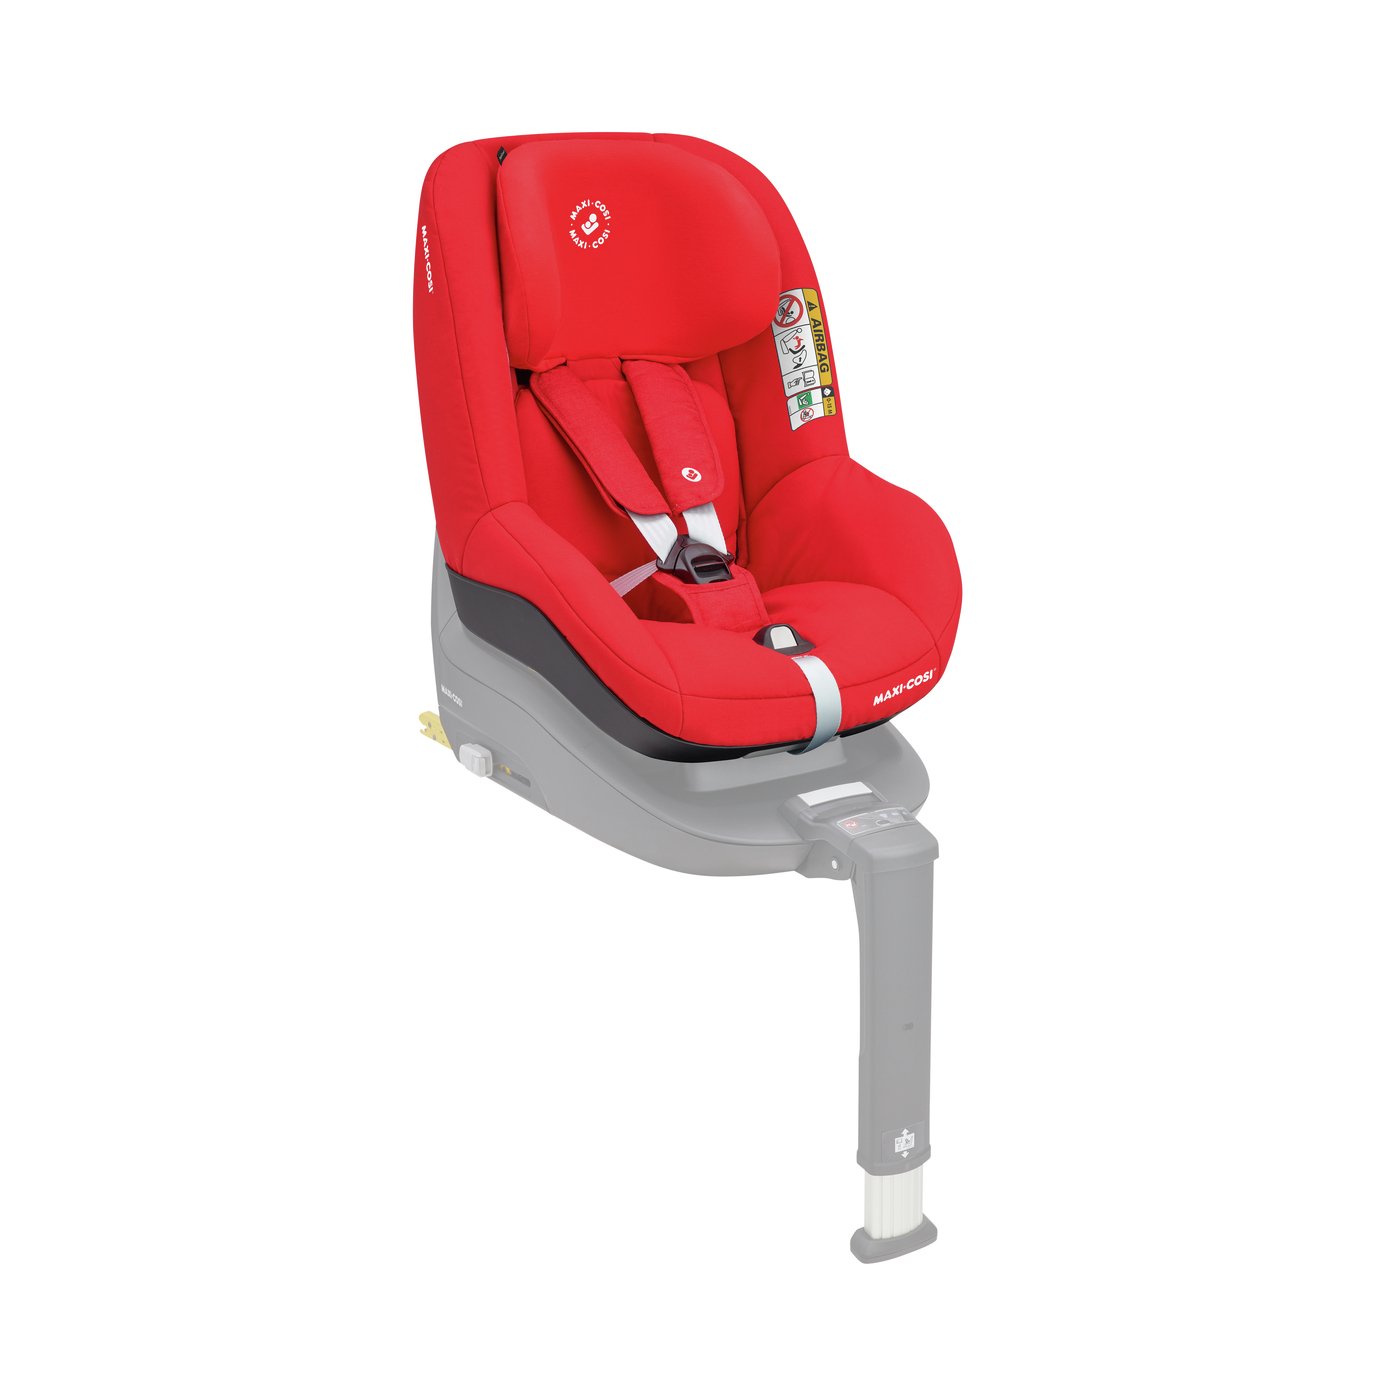 Maxi-Cosi Pearl Smart Group 1 i-Size Car Seat - Nomad Red